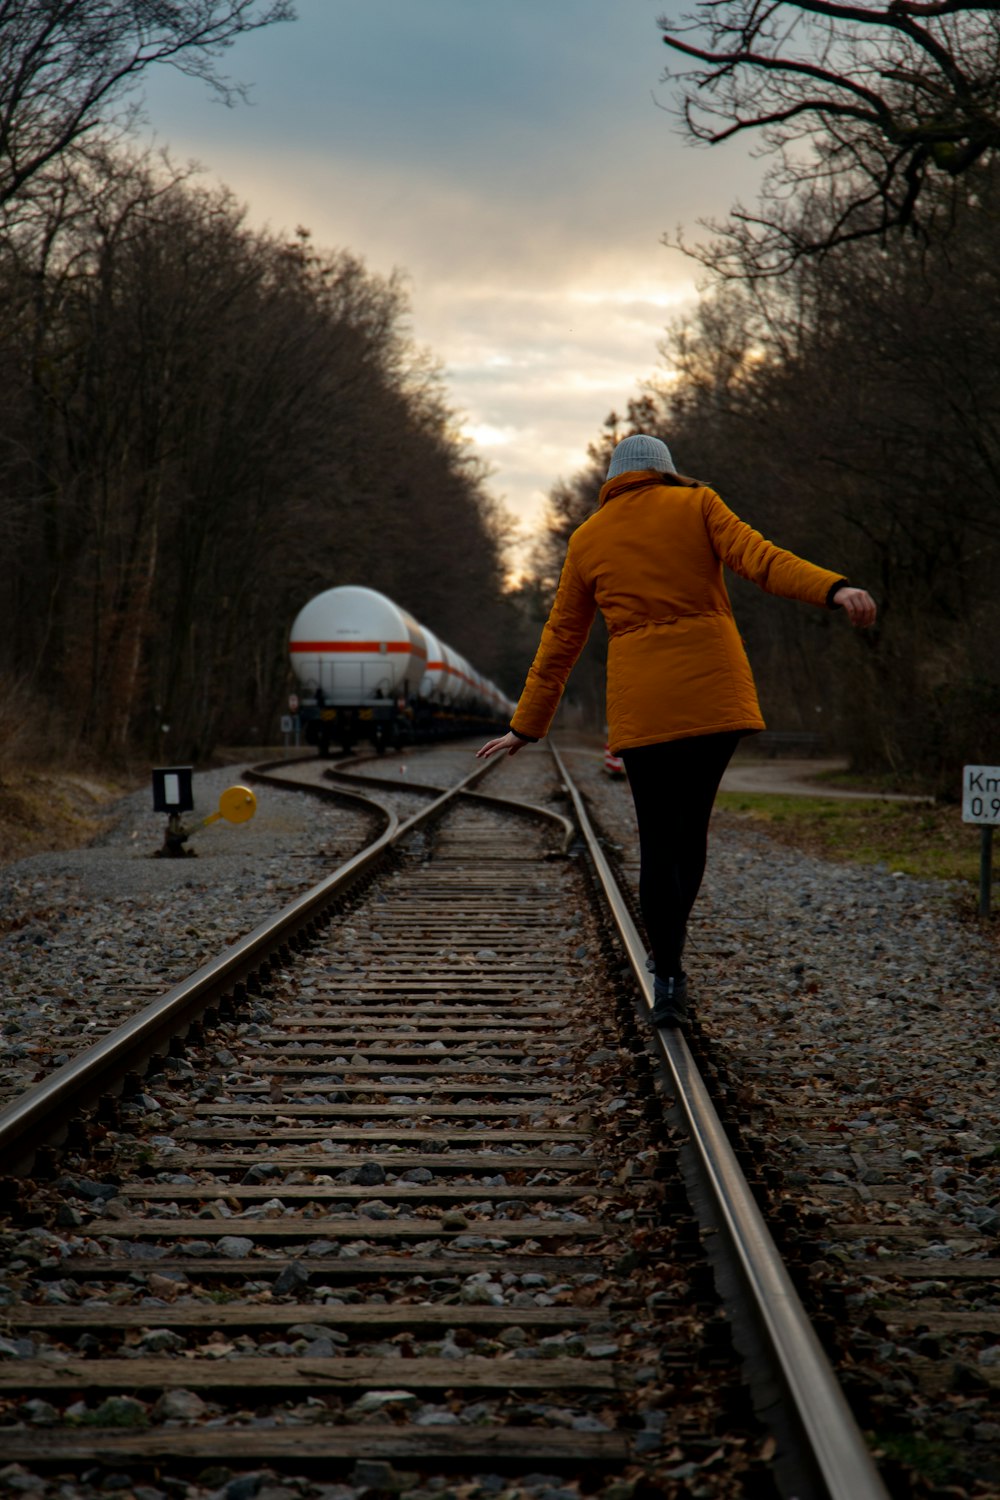 a woman in a yellow jacket is walking on a train track